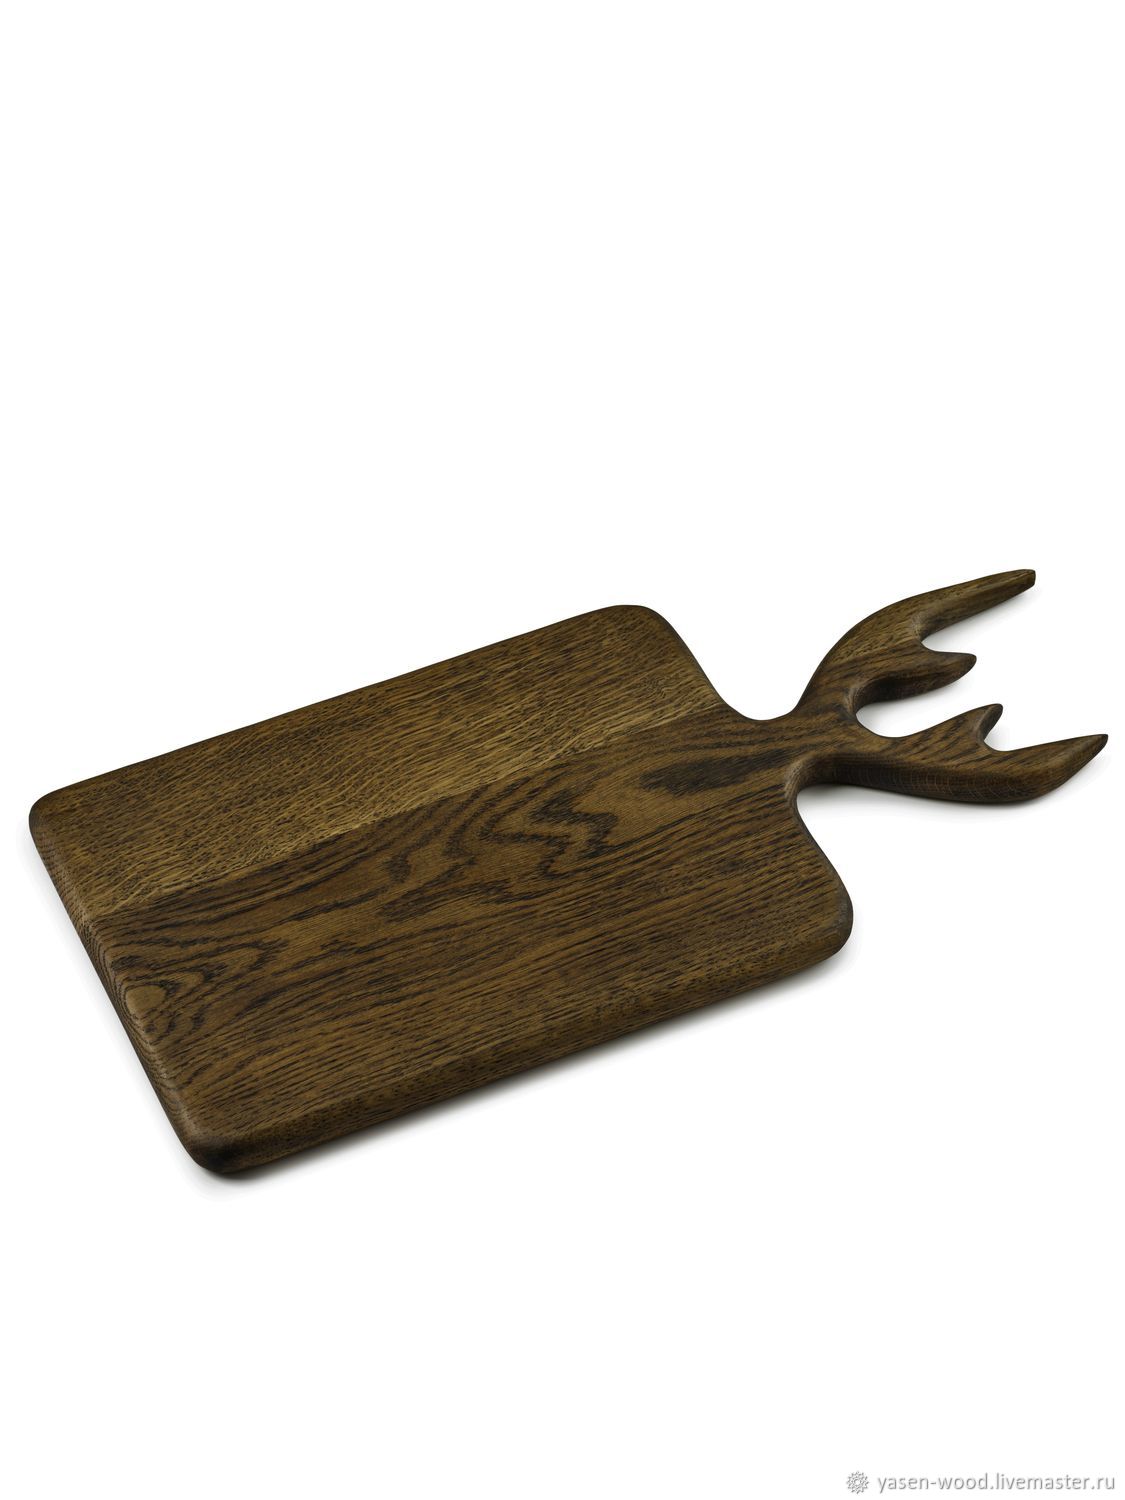 Cutting board 'Straight large with Horns', Cutting Boards, Moscow,  Фото №1